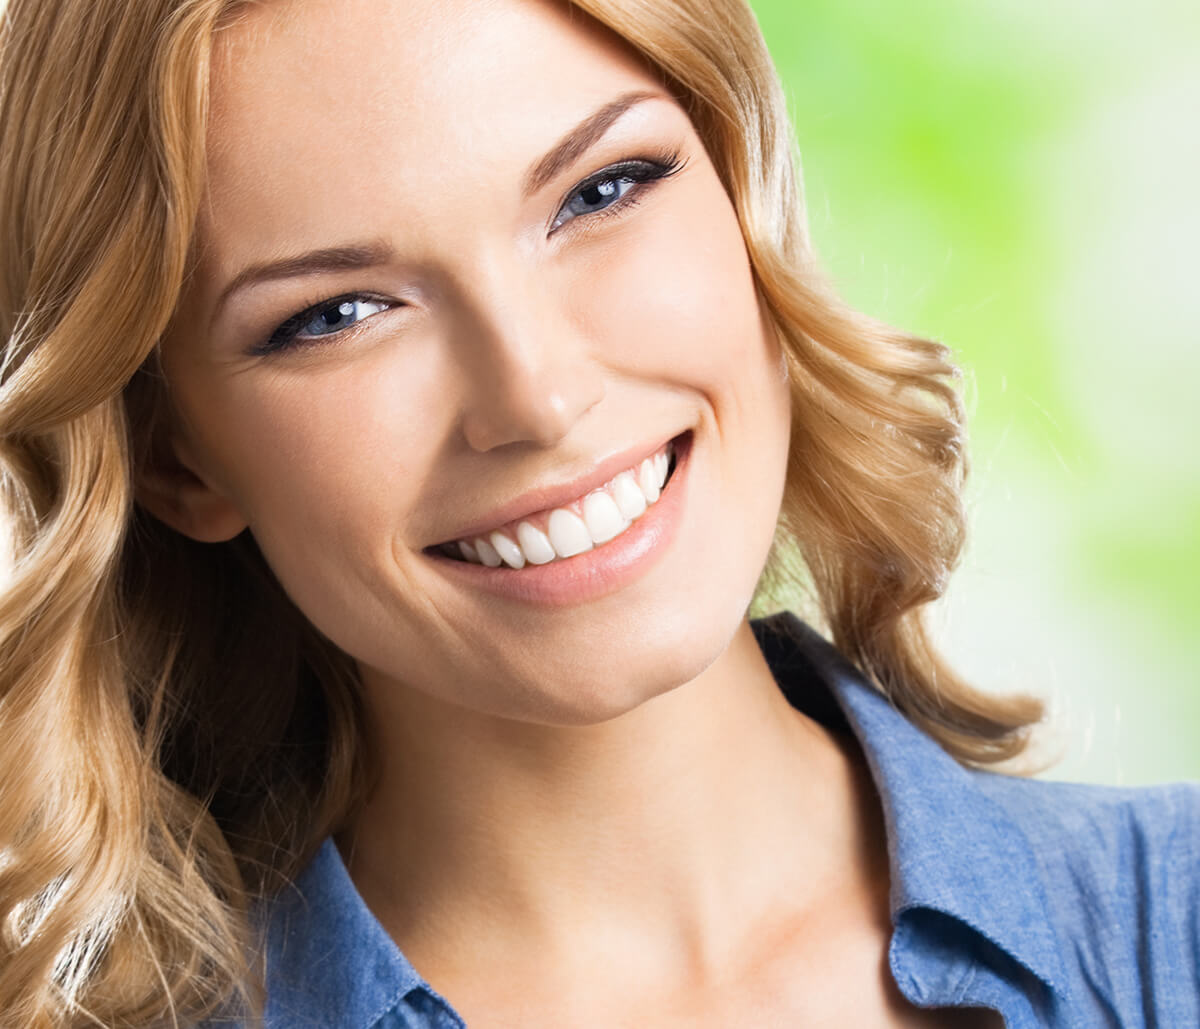 Ozone Therapy for Teeth at Alpha Plus Dental Center in Brookline MA Area